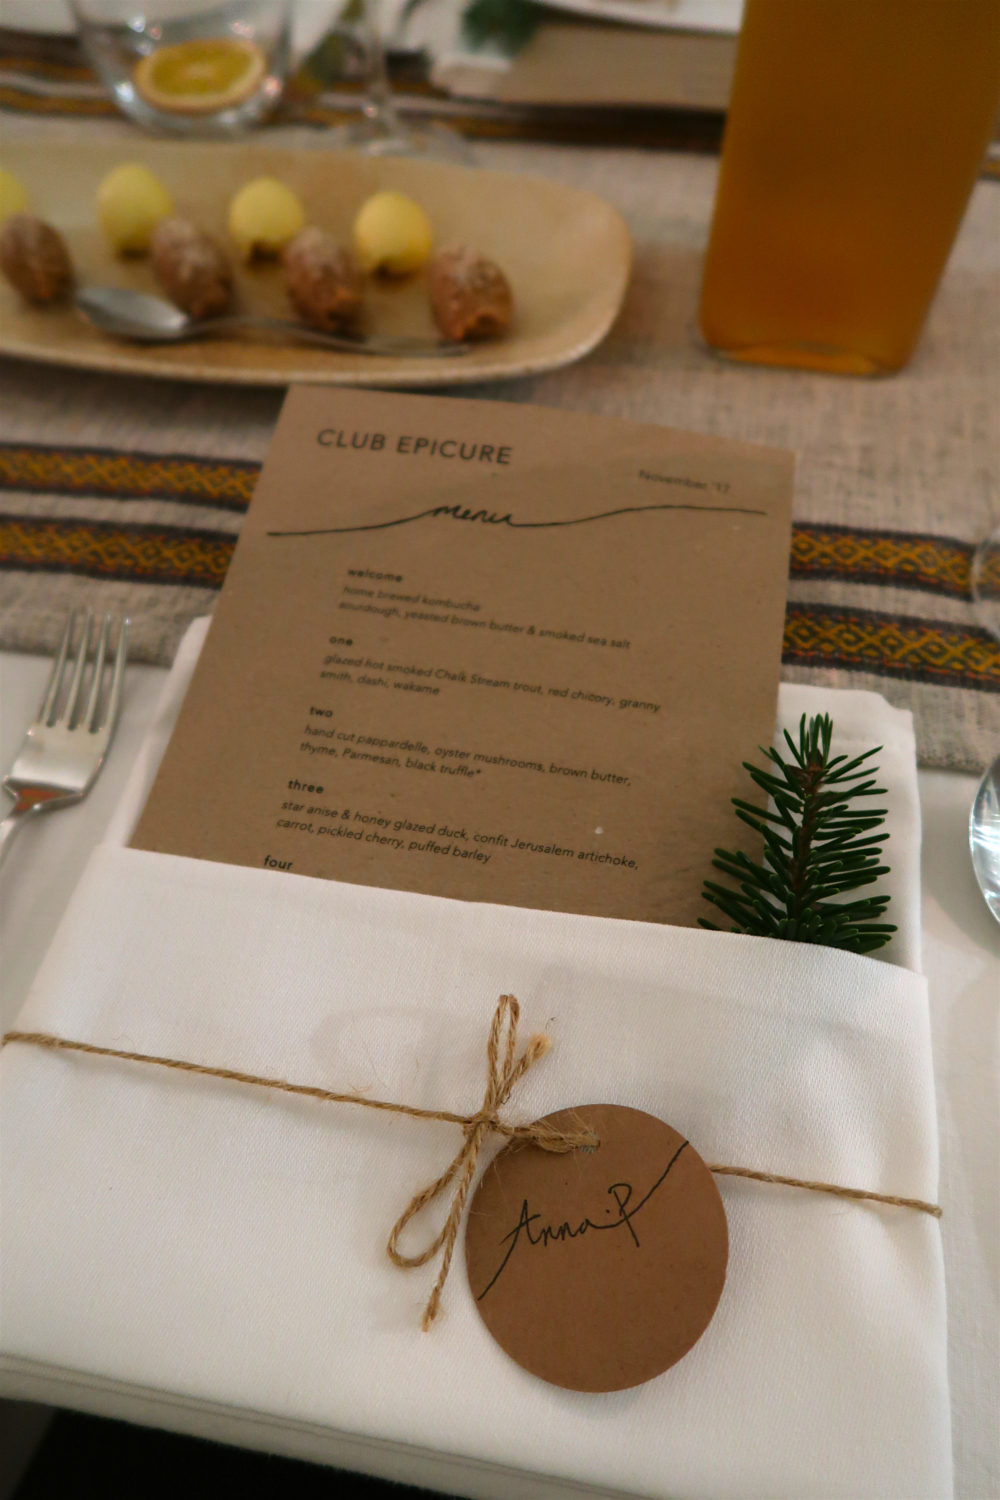 Winchester Dining: Club Epicure